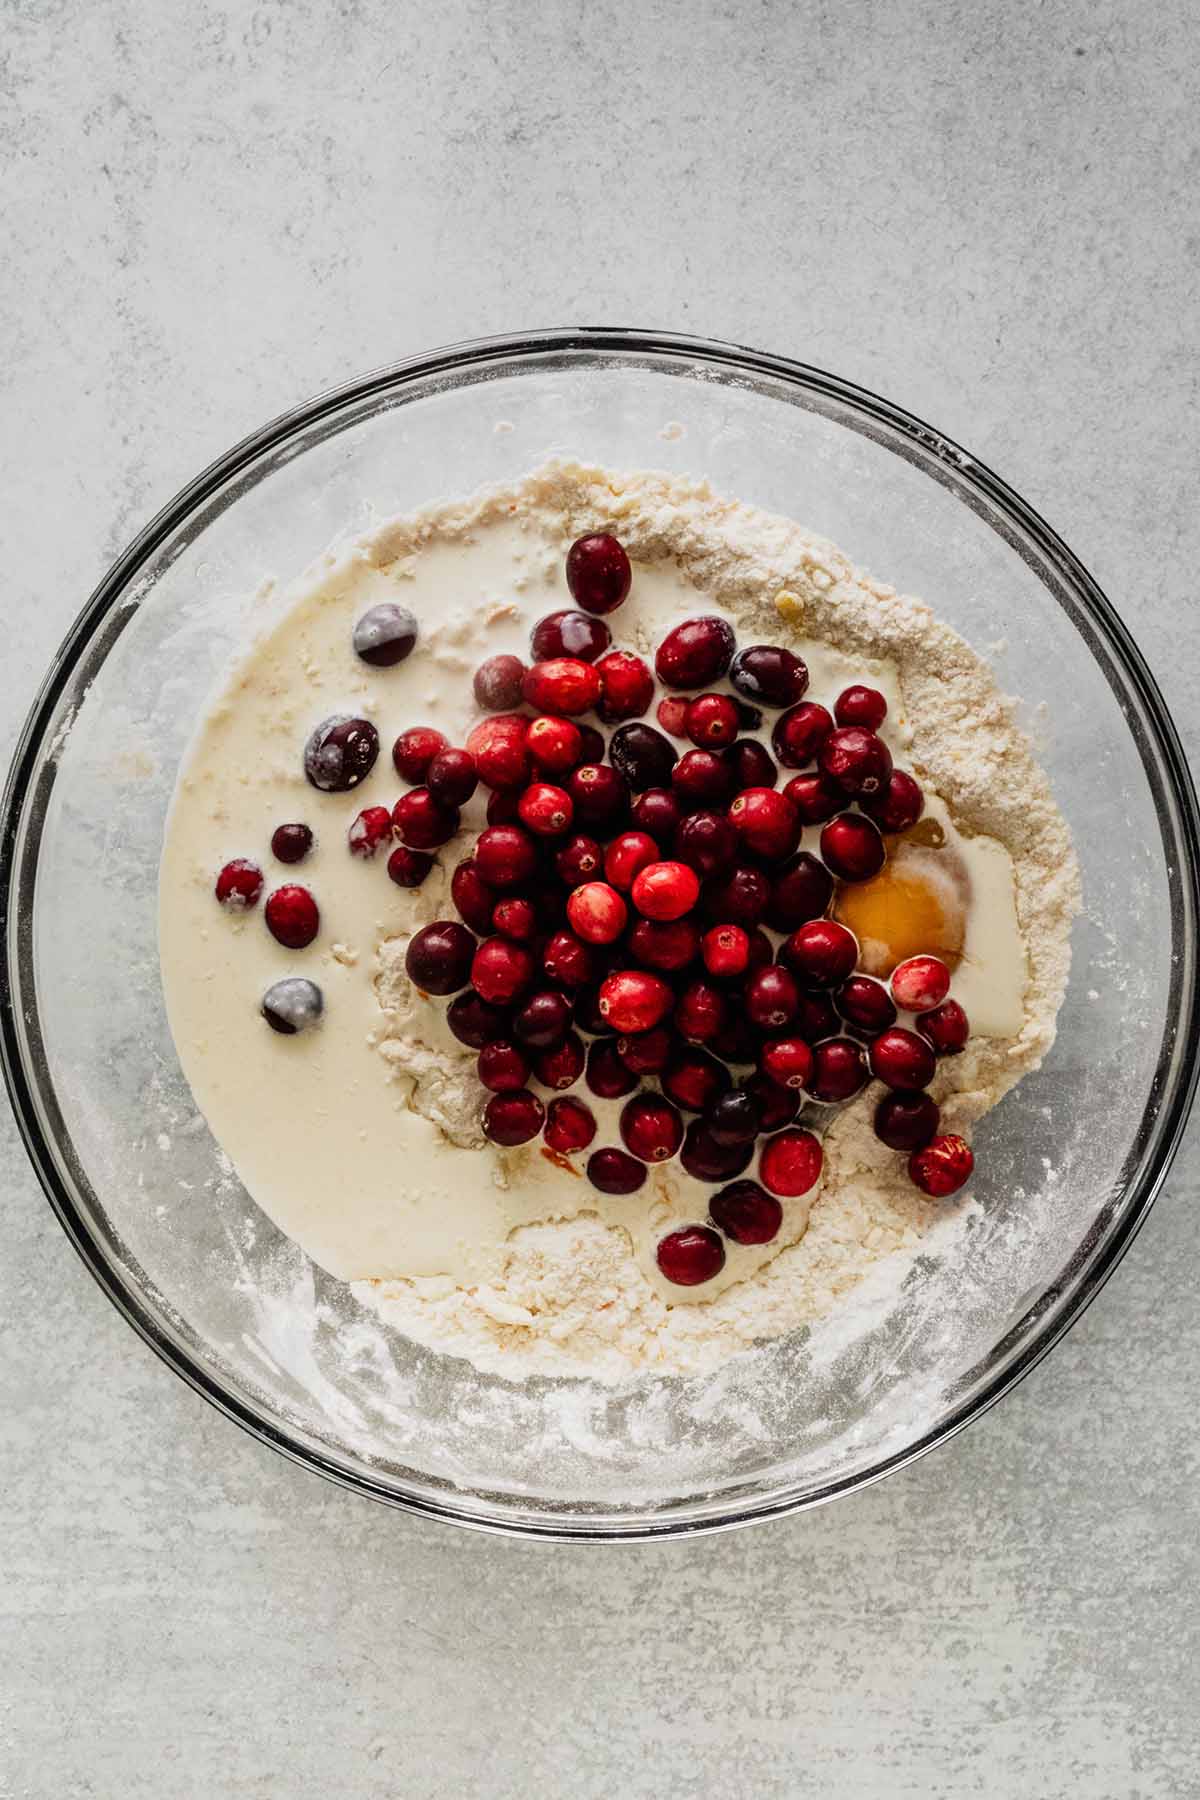 Wet ingredients and cranberries in a glass bowl with crumbly dry mixture.